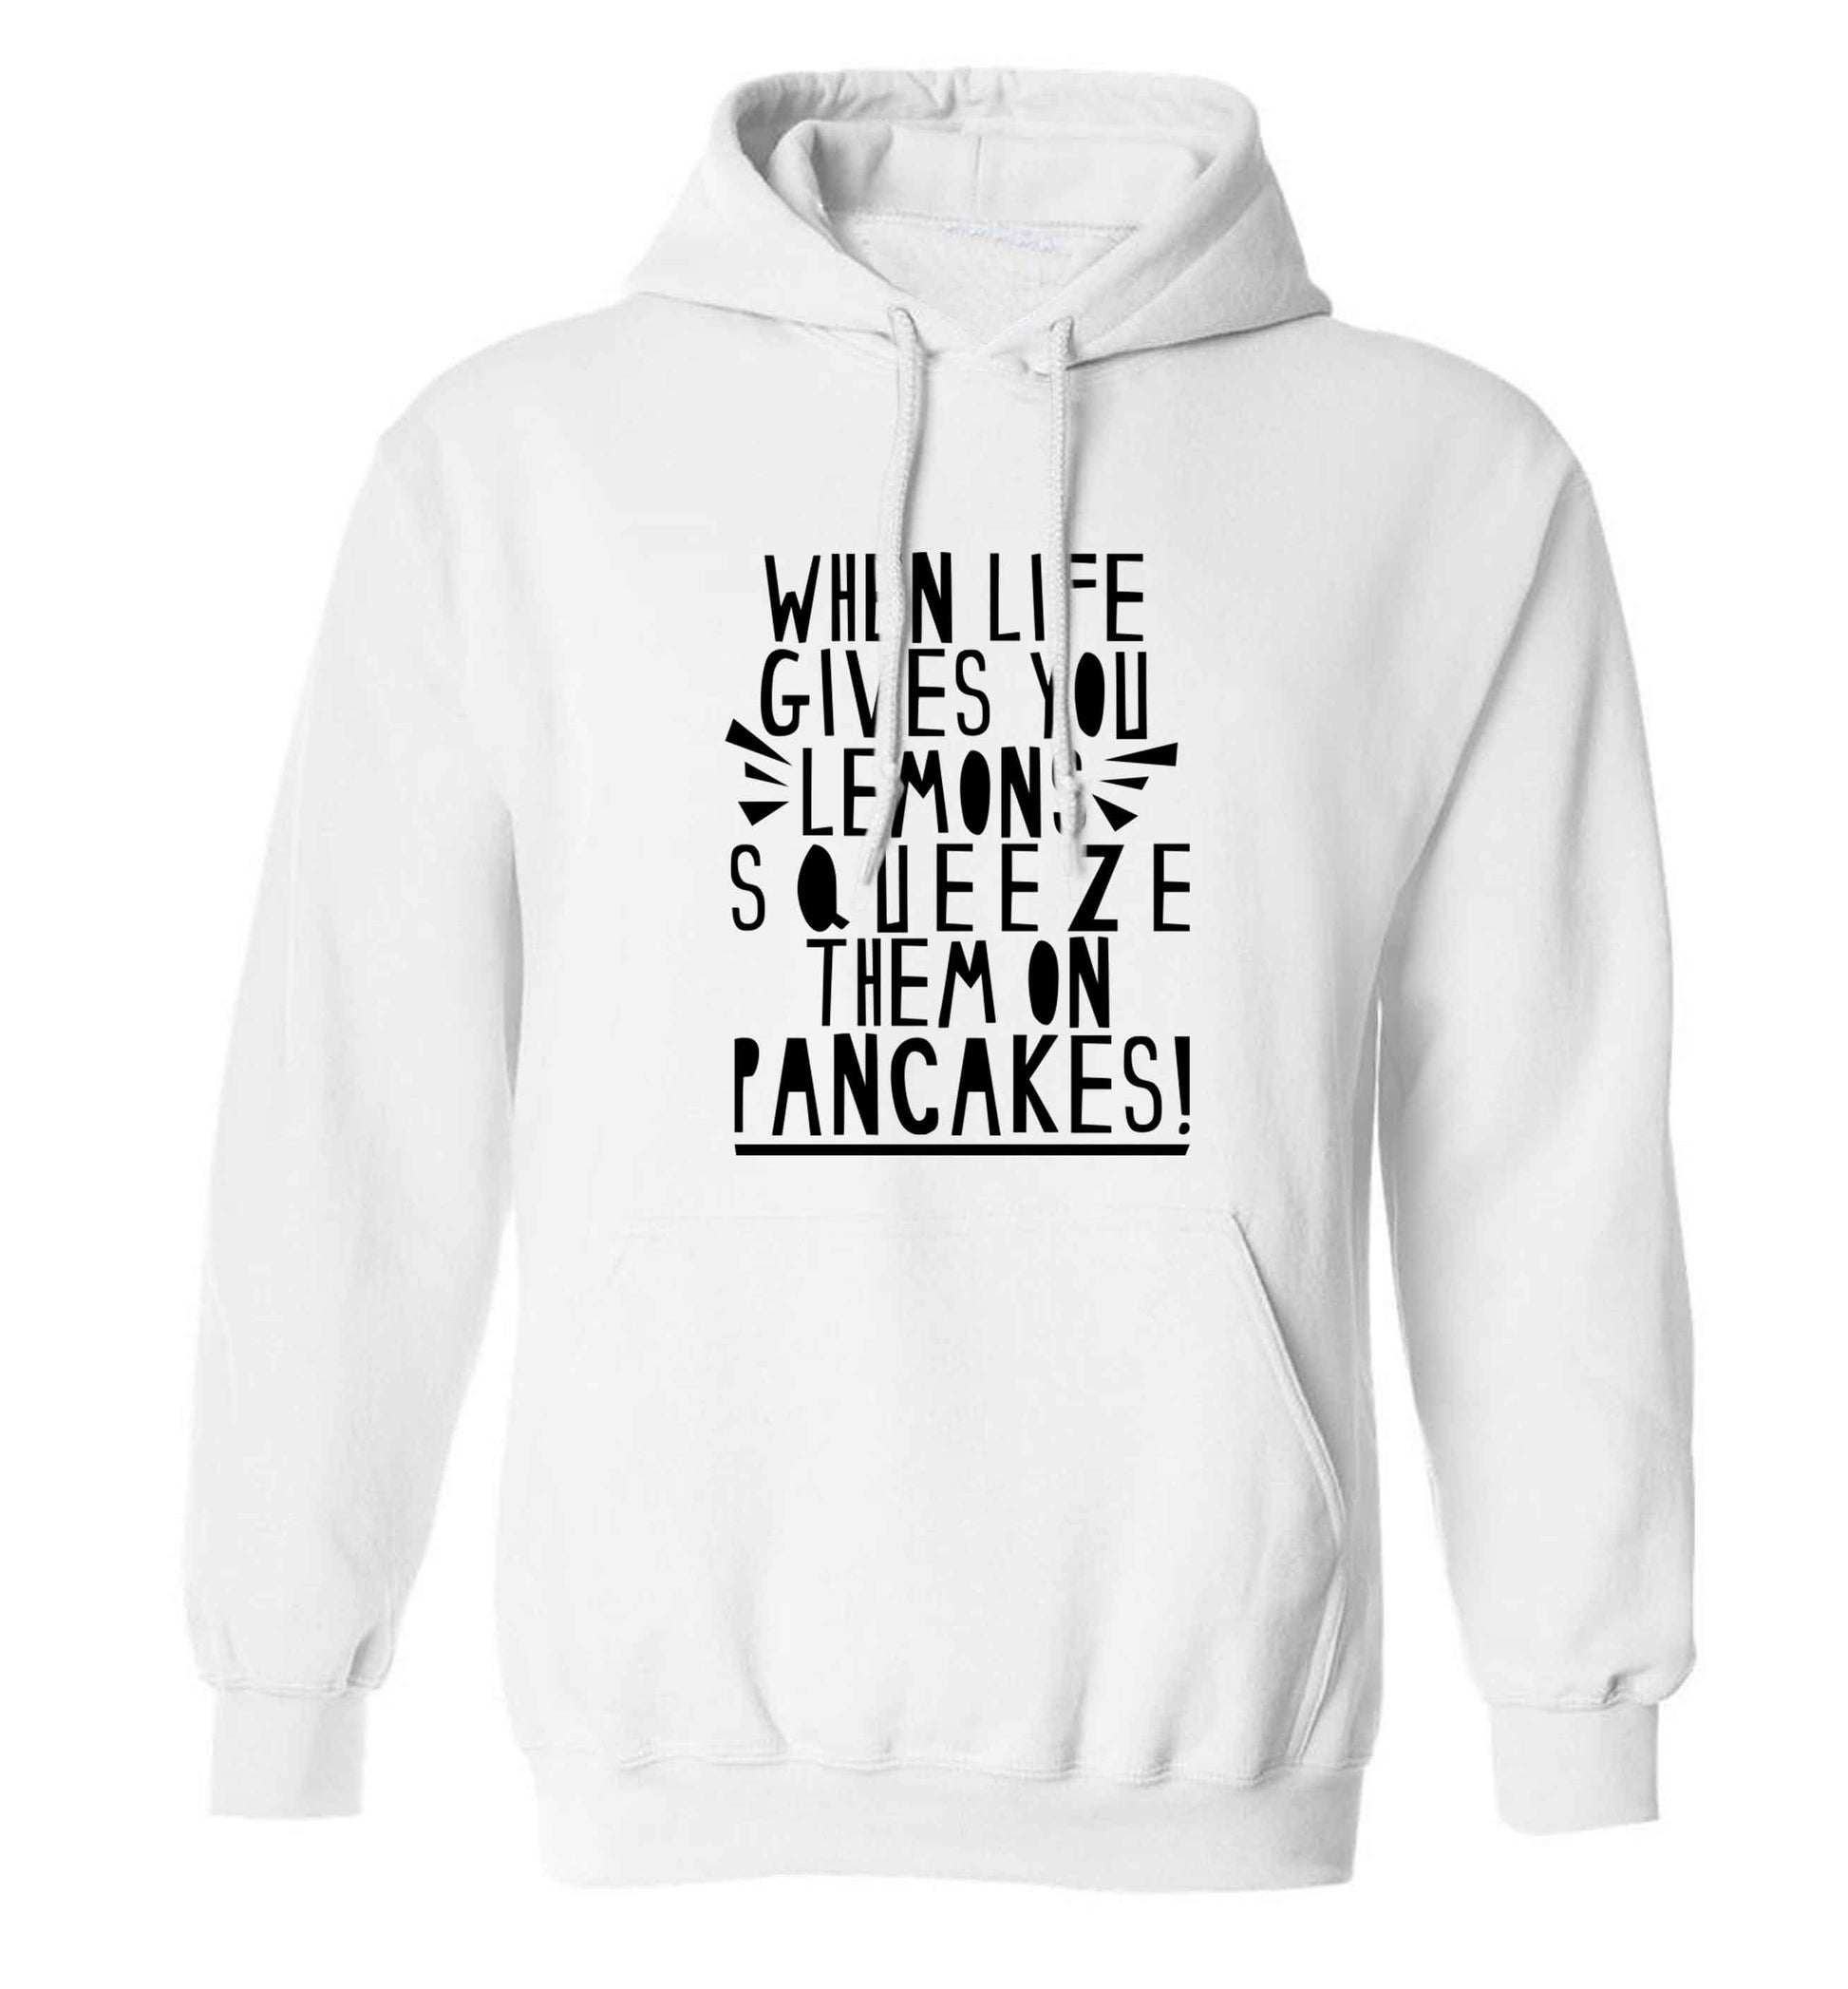 When life gives you lemons squeeze them on pancakes! adults unisex white hoodie 2XL